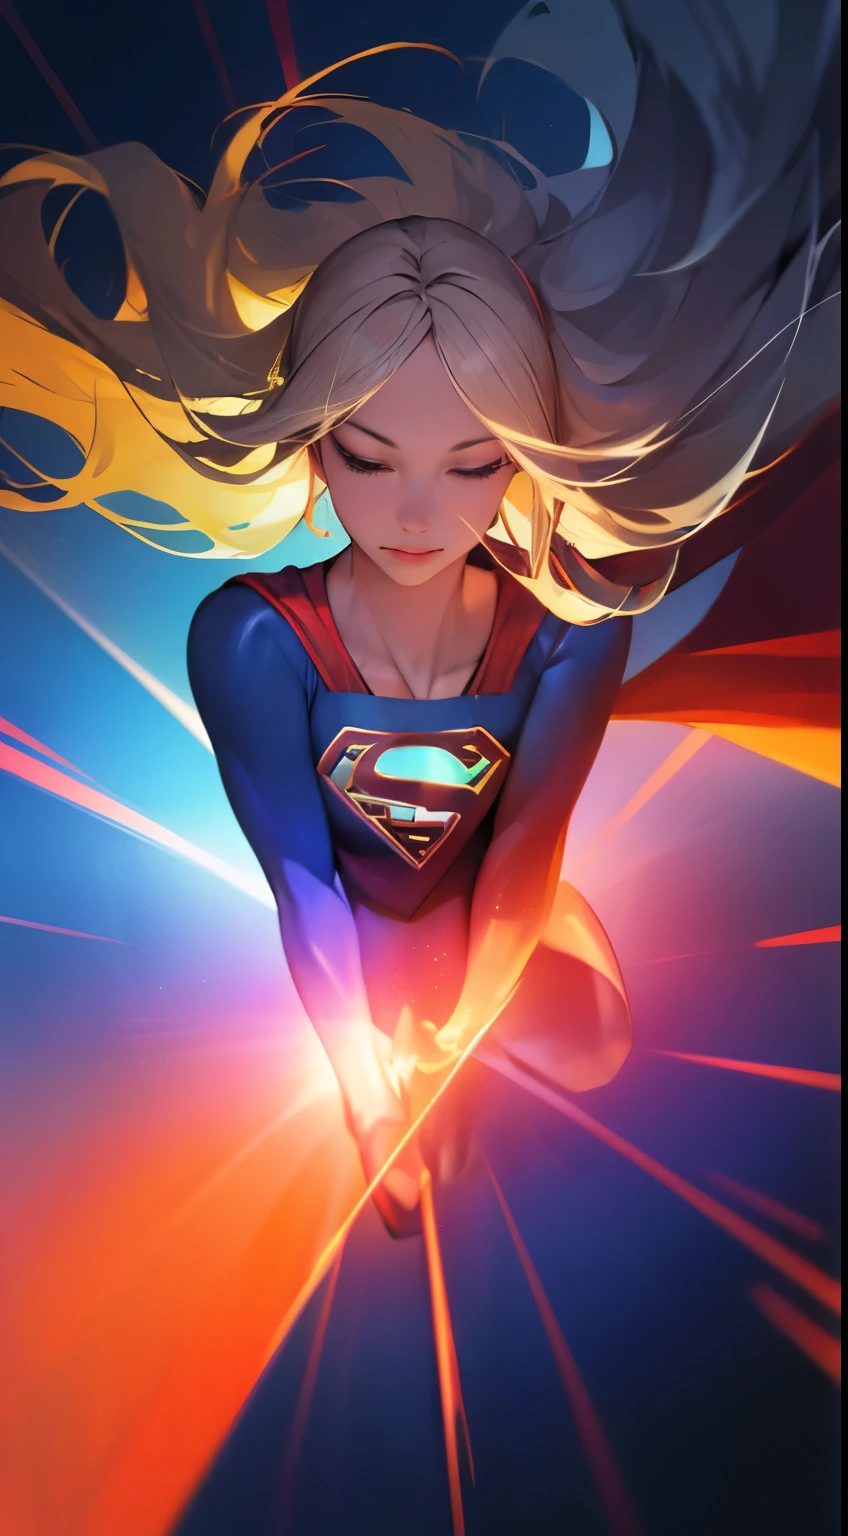 (best quality, vivid colors:1.2, anime:1.1), ULTRA-DETAILED,(realistic:1.37), DC comics character, SUPERGIRL, FLYING between CLOUDS, supersonic VELOCITY, sharp focus, vibrant colors, dynamic pose, flowing cape, intense action, strong wind effects, high speed motion, intense energy, blue sky backdrop, white fluffy clouds, dazzling sunlight.